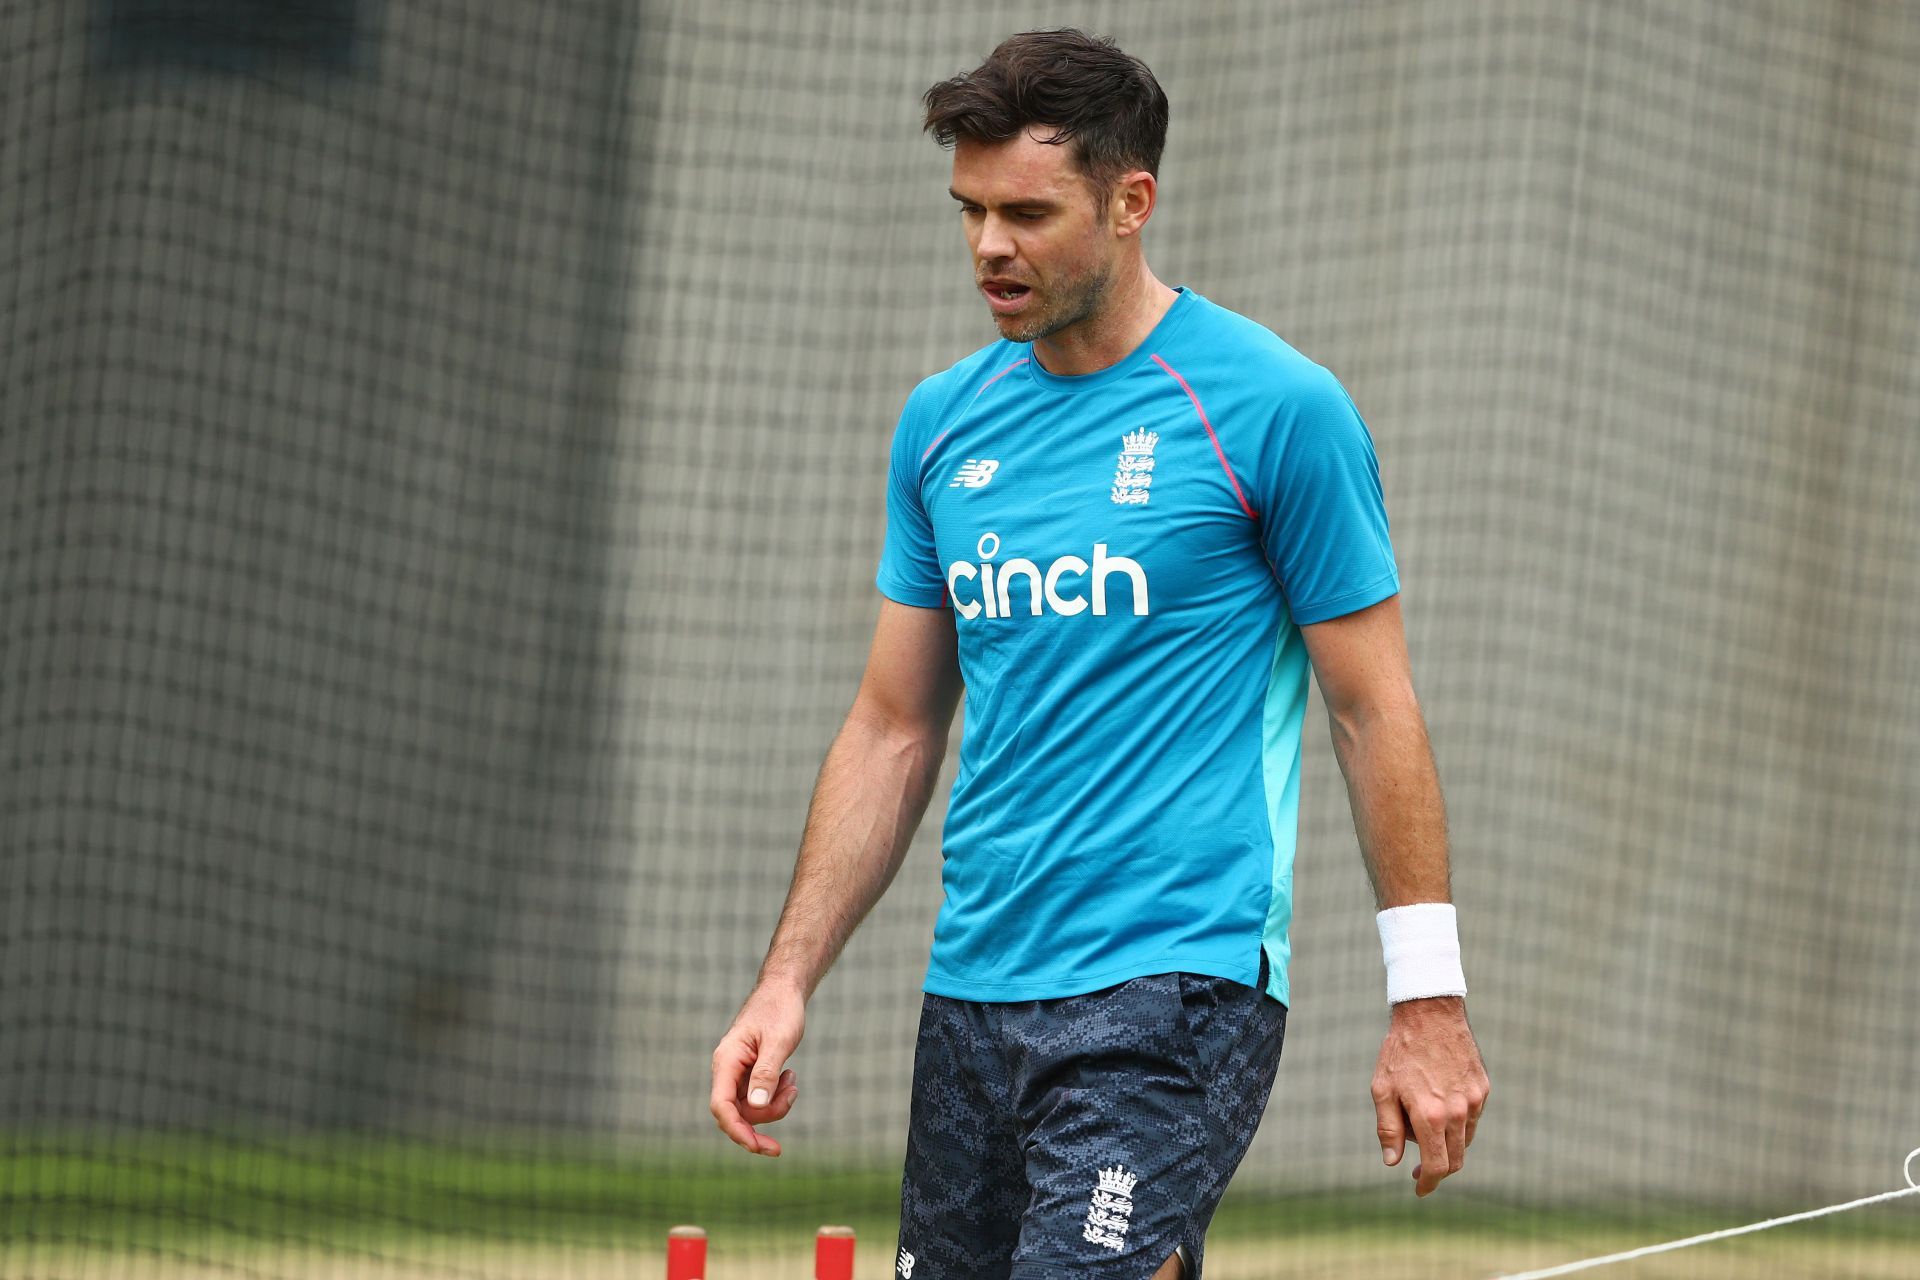 James Anderson at the England Nets Session. (Image Credits: Getty)